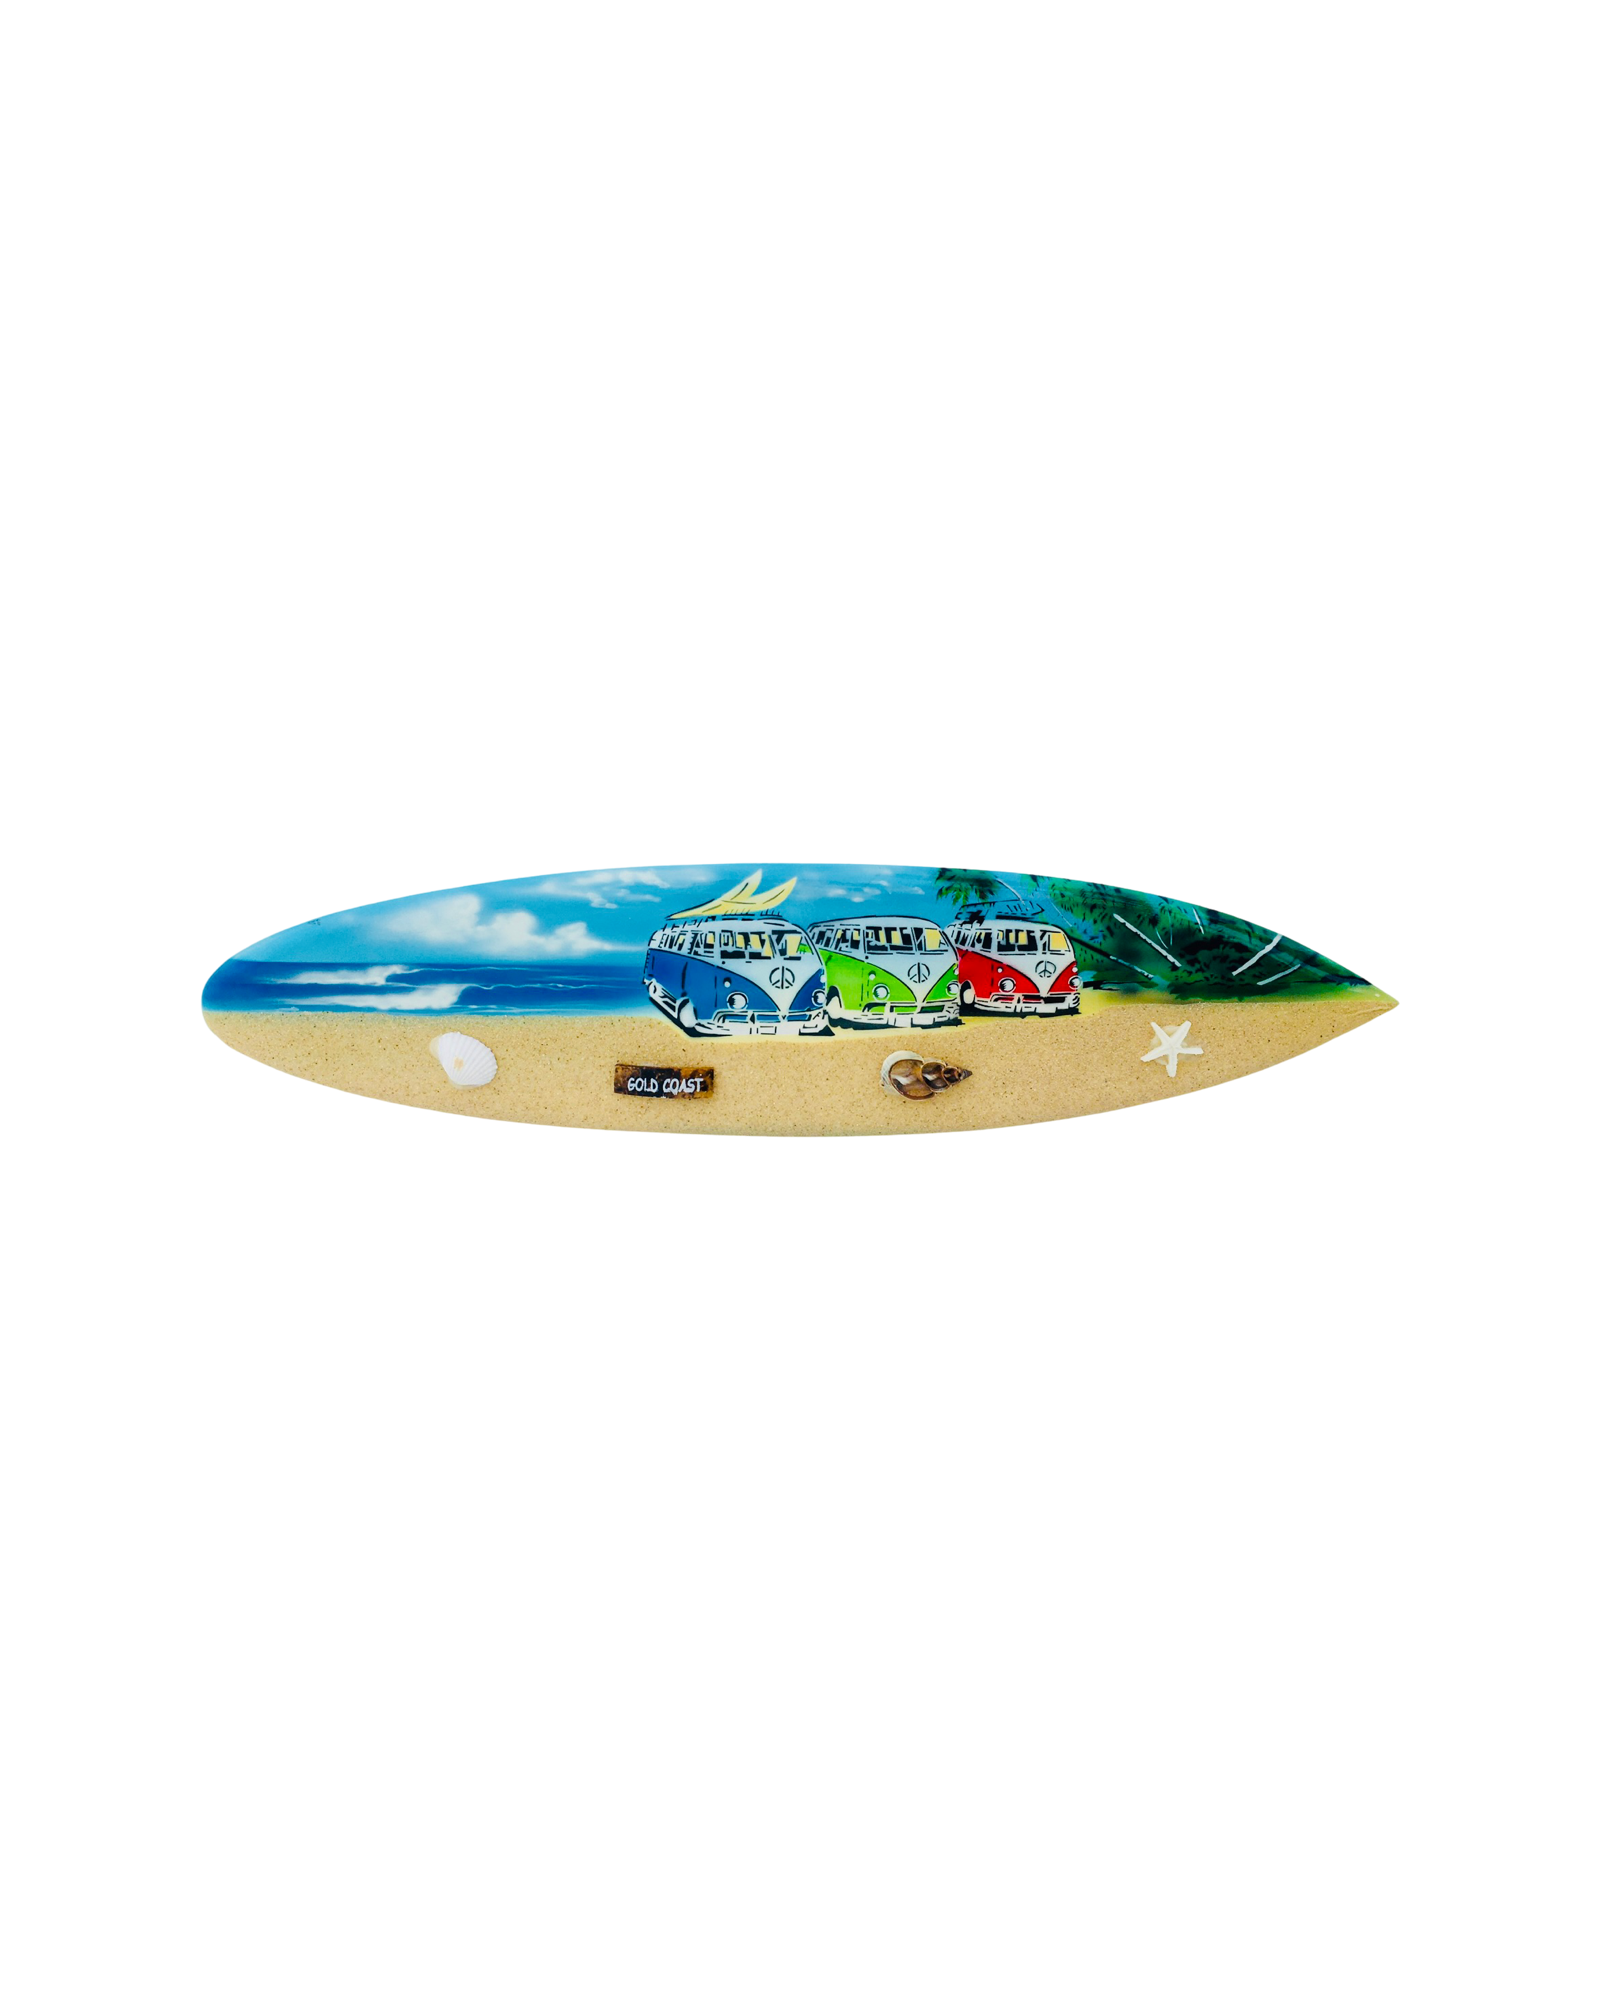 Different style surfboards with combis, shells and sand art. 